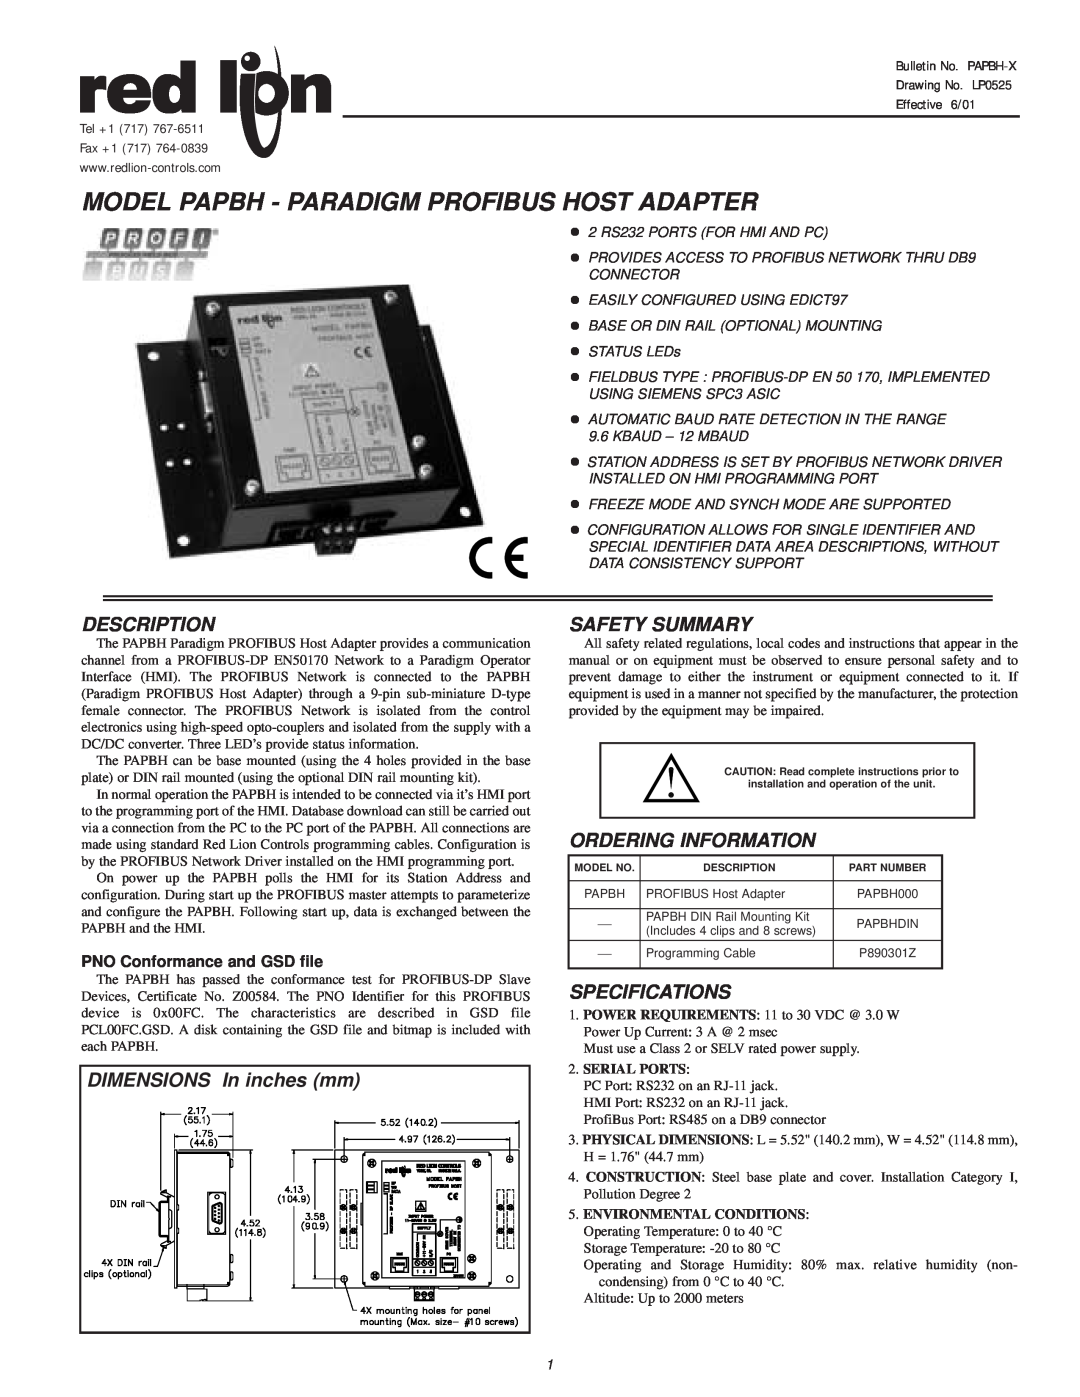 Siemens PAPBH dimensions Description, DIMENSIONS In inches mm, Safety Summary, Ordering Information, Specifications 